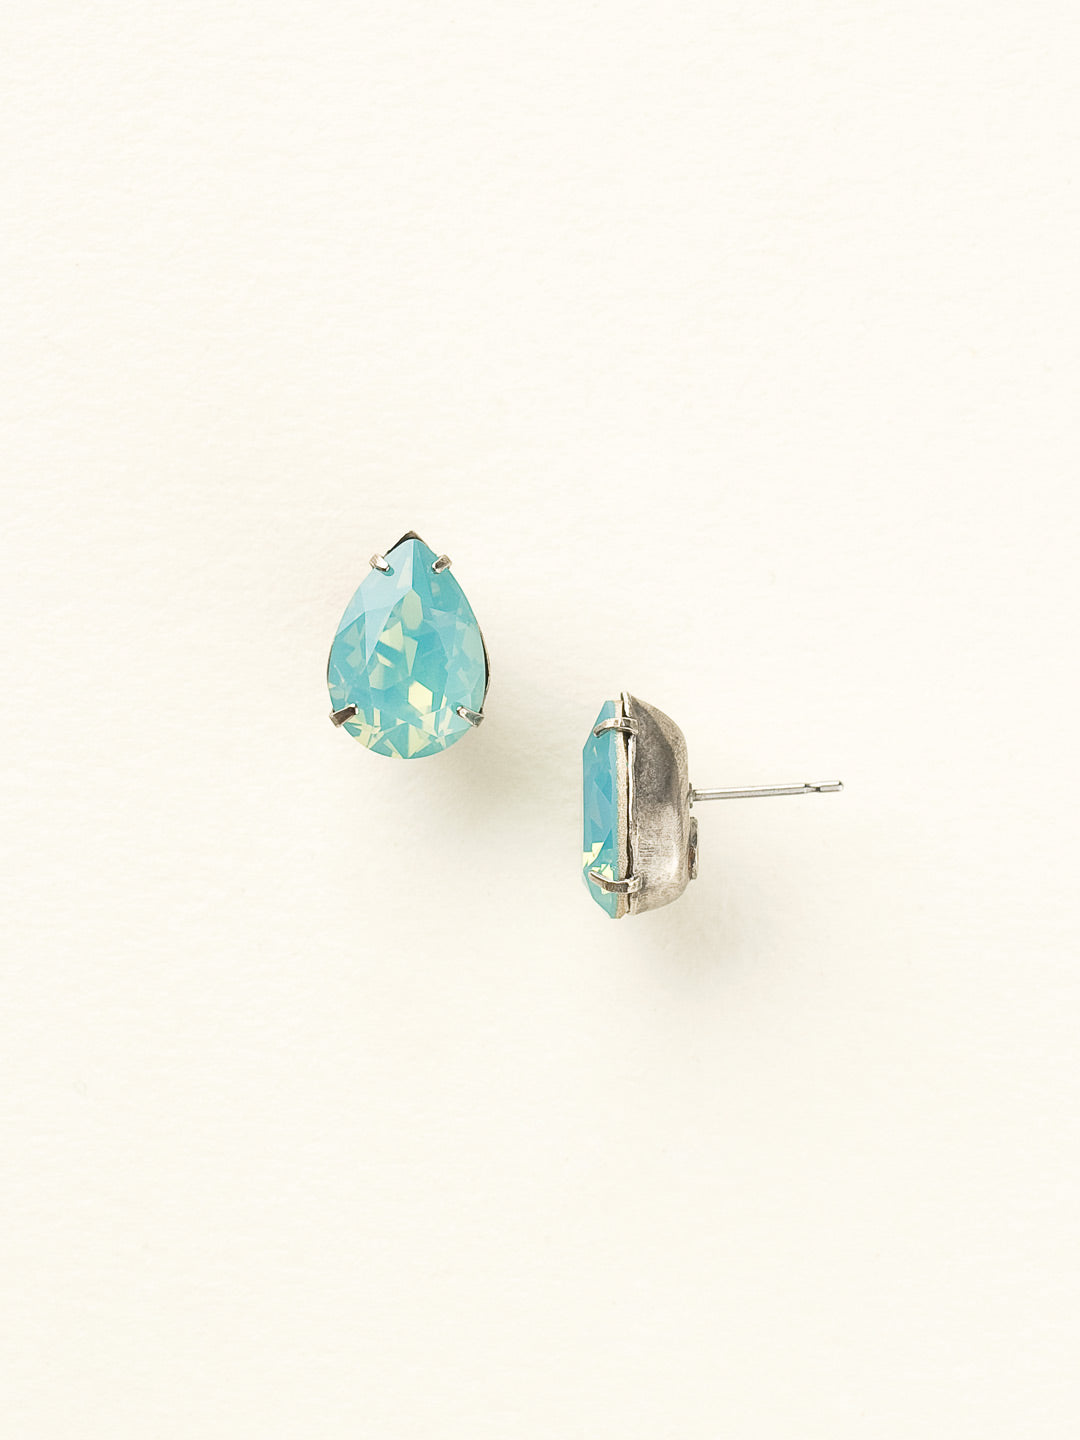 Ginnie Stud Earrings - ECR115ASCRM - <p>A beautiful basic stud. These classic single teardrop post earrings are perfect for any occasion, especially the everyday look. A timeless treasure that will sparkle season after season. From Sorrelli's Crystal Moss collection in our Antique Silver-tone finish.</p>